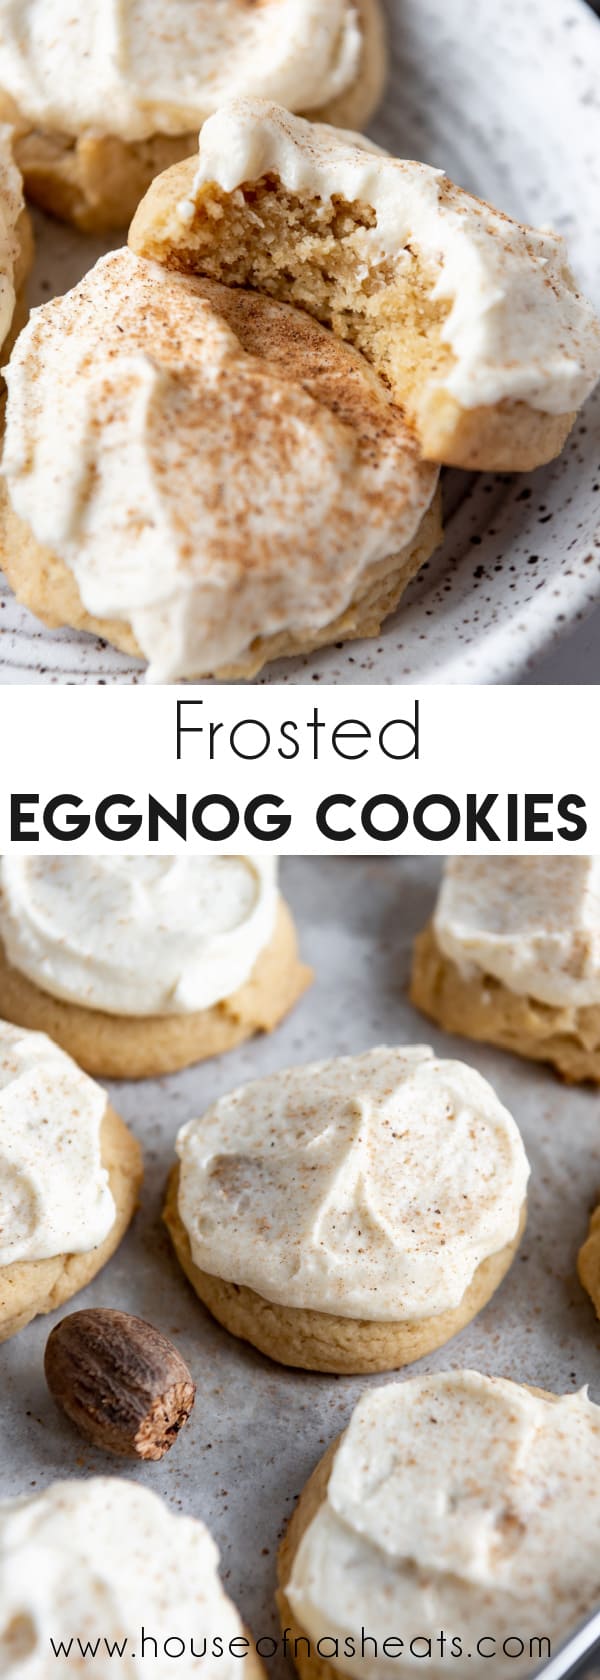 A collage of images of frosted eggnog cookies with text overlay.